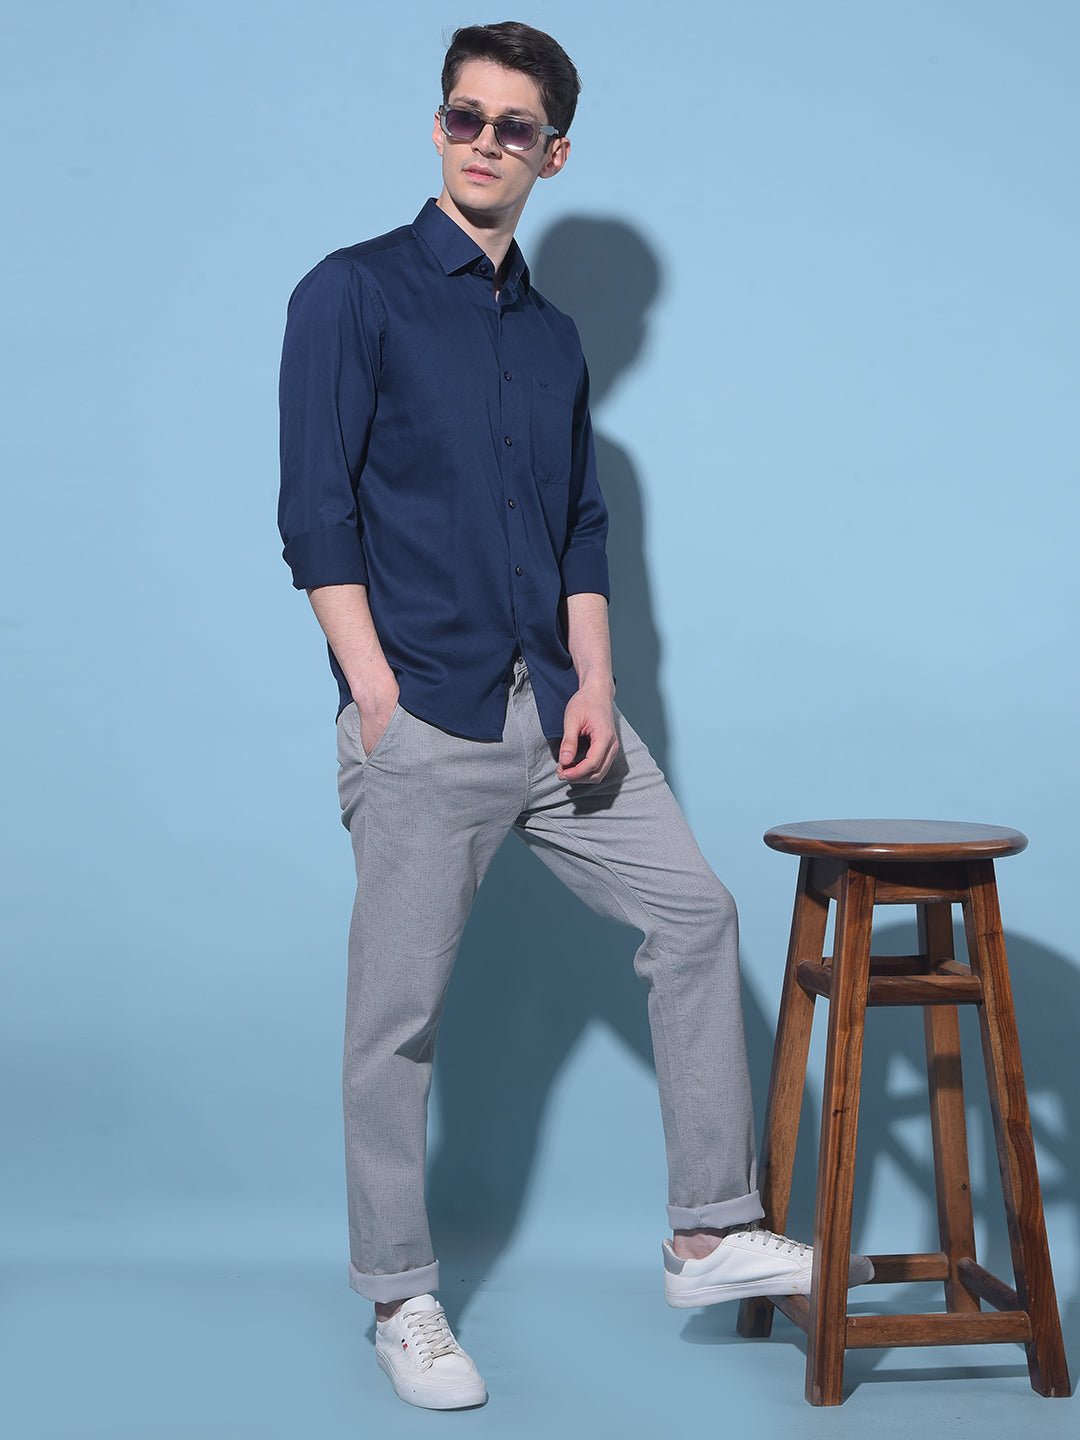 Grey Textured Printed Chinos Trousers-Men Trousers-Crimsoune Club